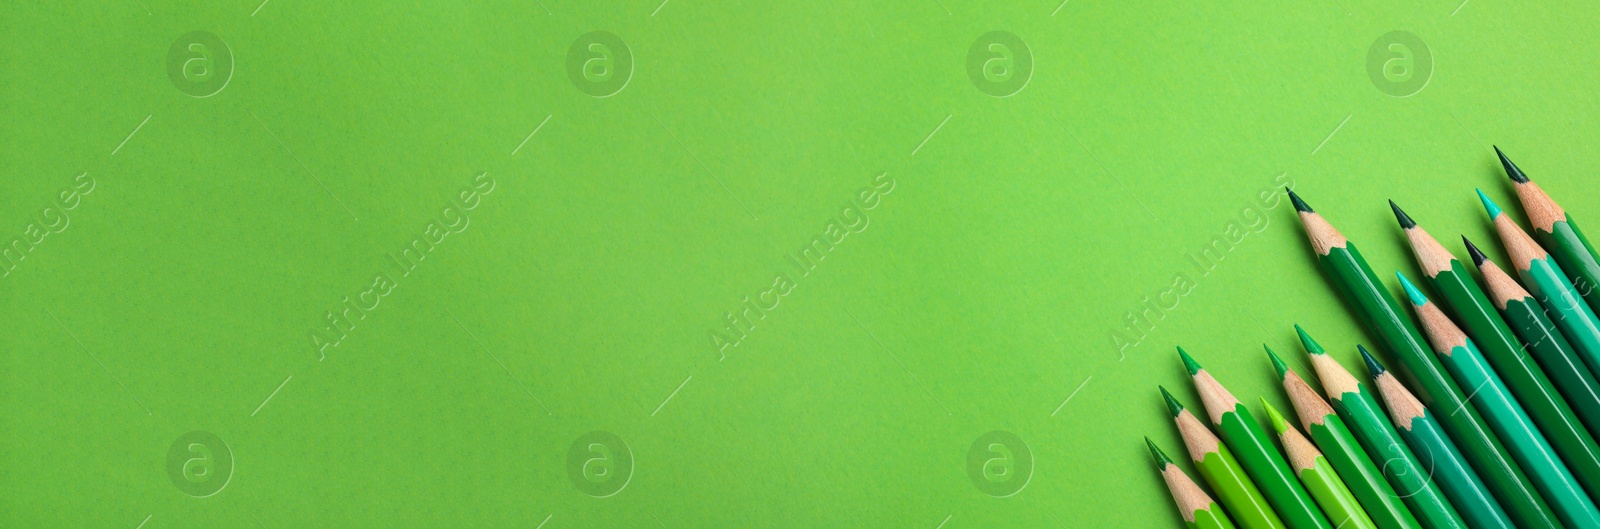 Image of Color pencils on green background, flat lay with space for text. Banner design